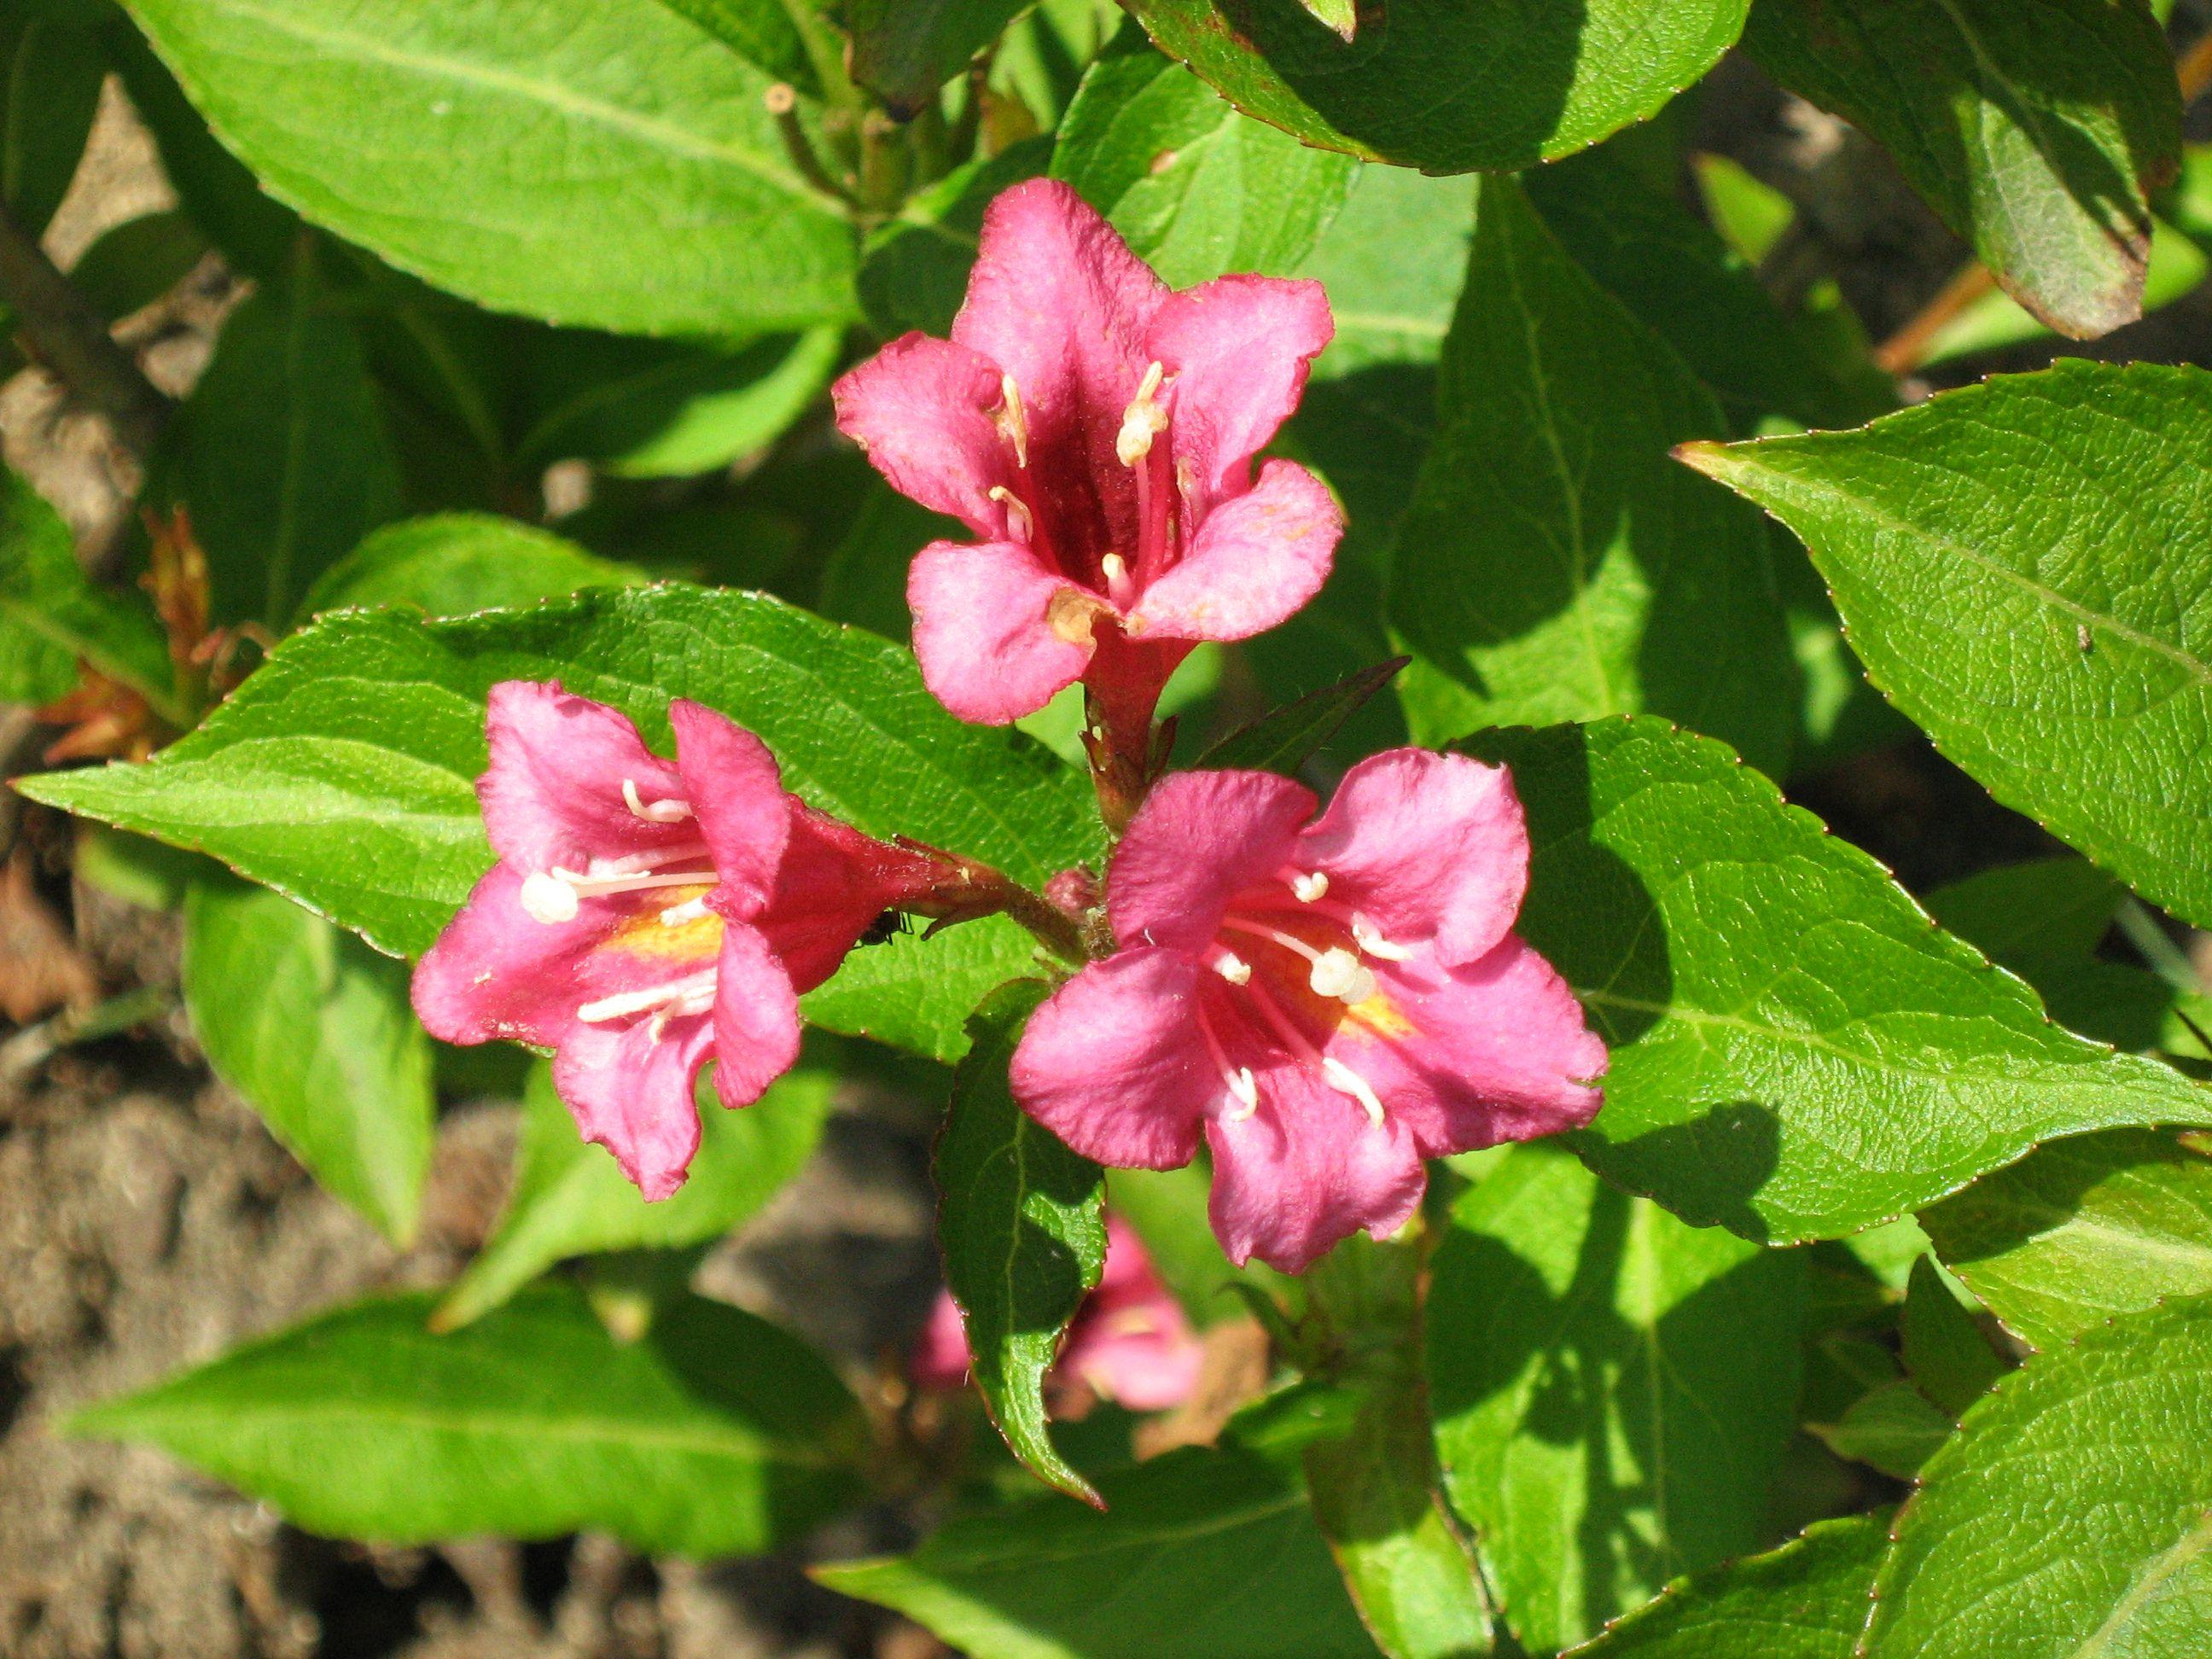 pink flowers with yellow anthers, pink filaments, lime leaves and stems